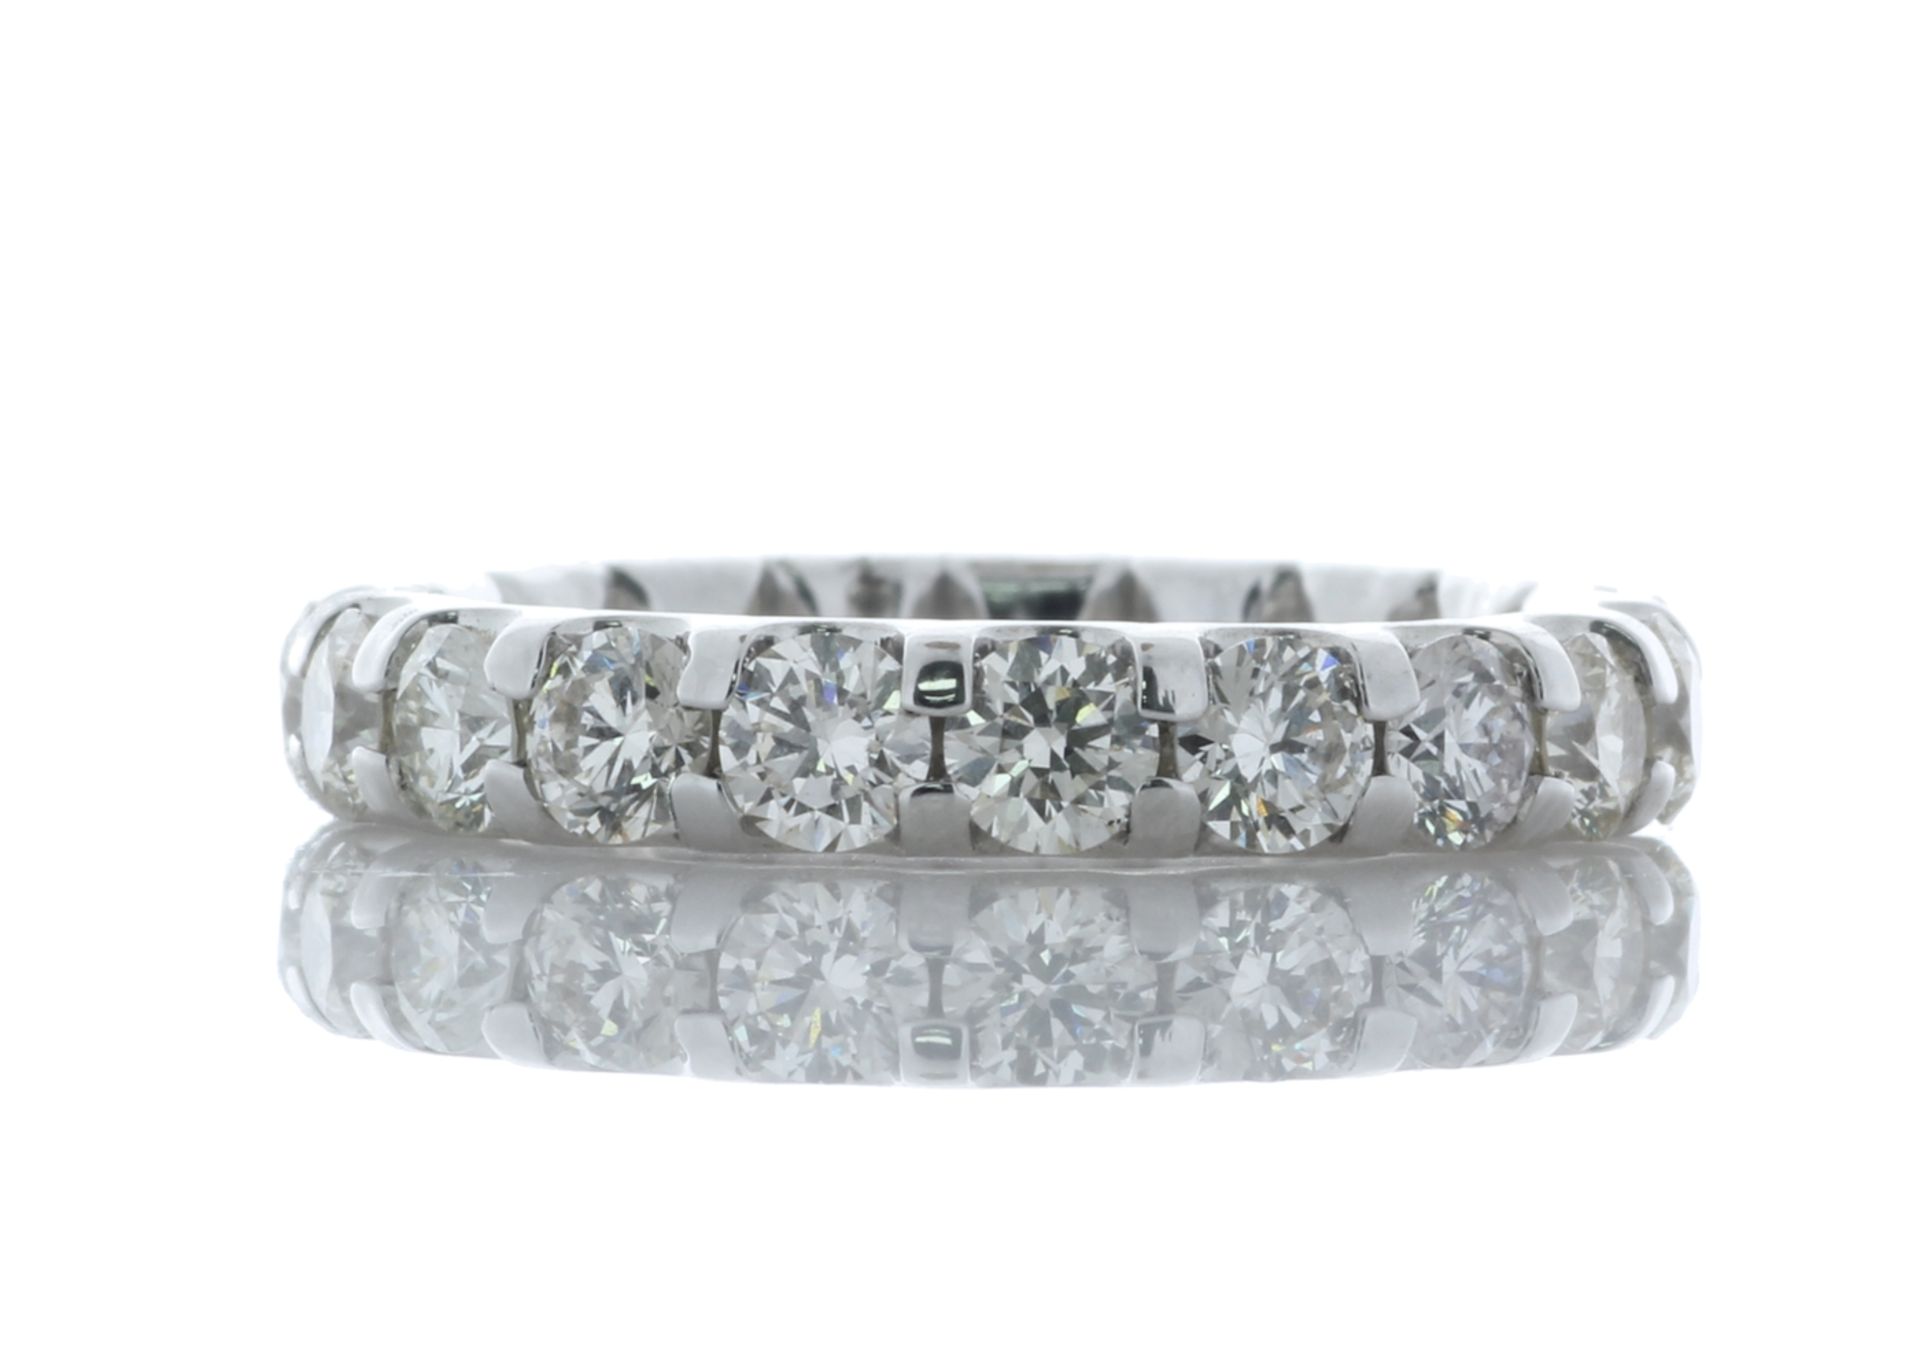 Platinum Full Eternity Diamond Ring 2.25 Carats - Valued by AGI £13,600.00 - Sixteen natural round